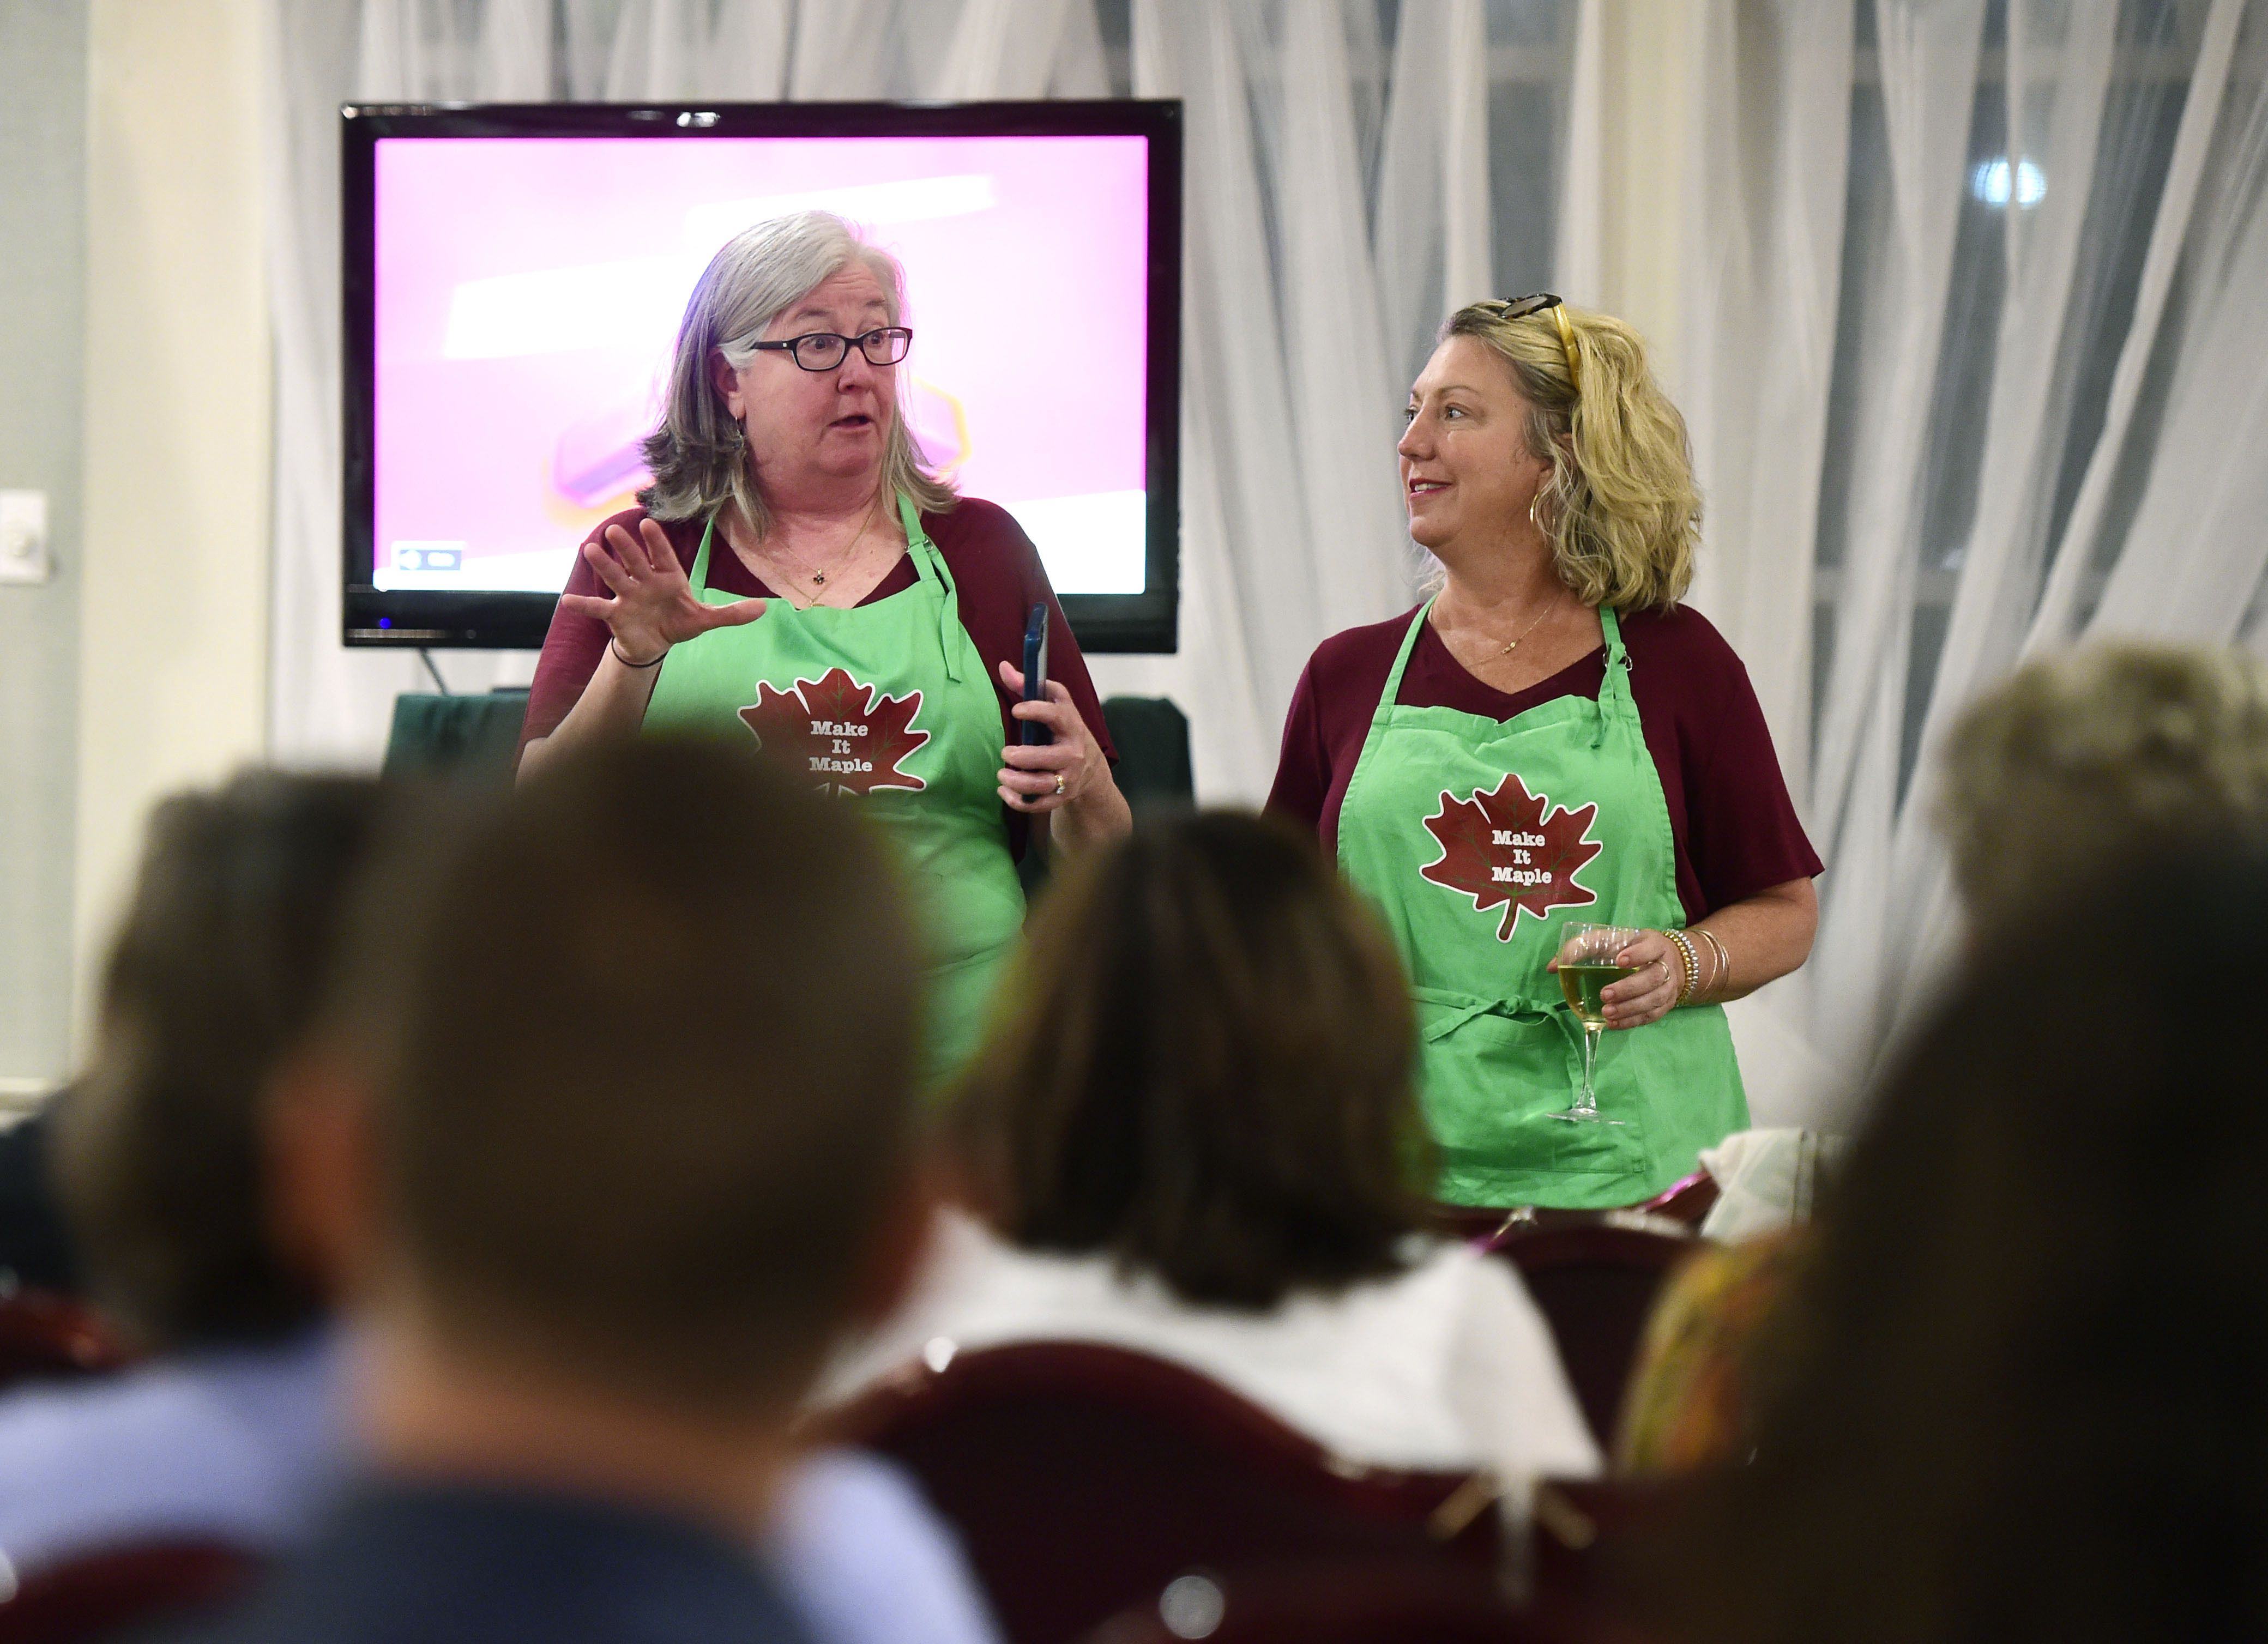 Sue Aldrich, left, and Paulette Fiorentino, both of Montpelier, Vt., explain some of the behind-the-scene details of their time competing on The Great Food Truck Race during a screening party for the opening episode at the Capital Plaza in Montpelier, Vt. on June 9, 2019. The reality program airs on The Food Network and the pair, along with Aldrich's son, Charlie, competed as the Make It Maple team.